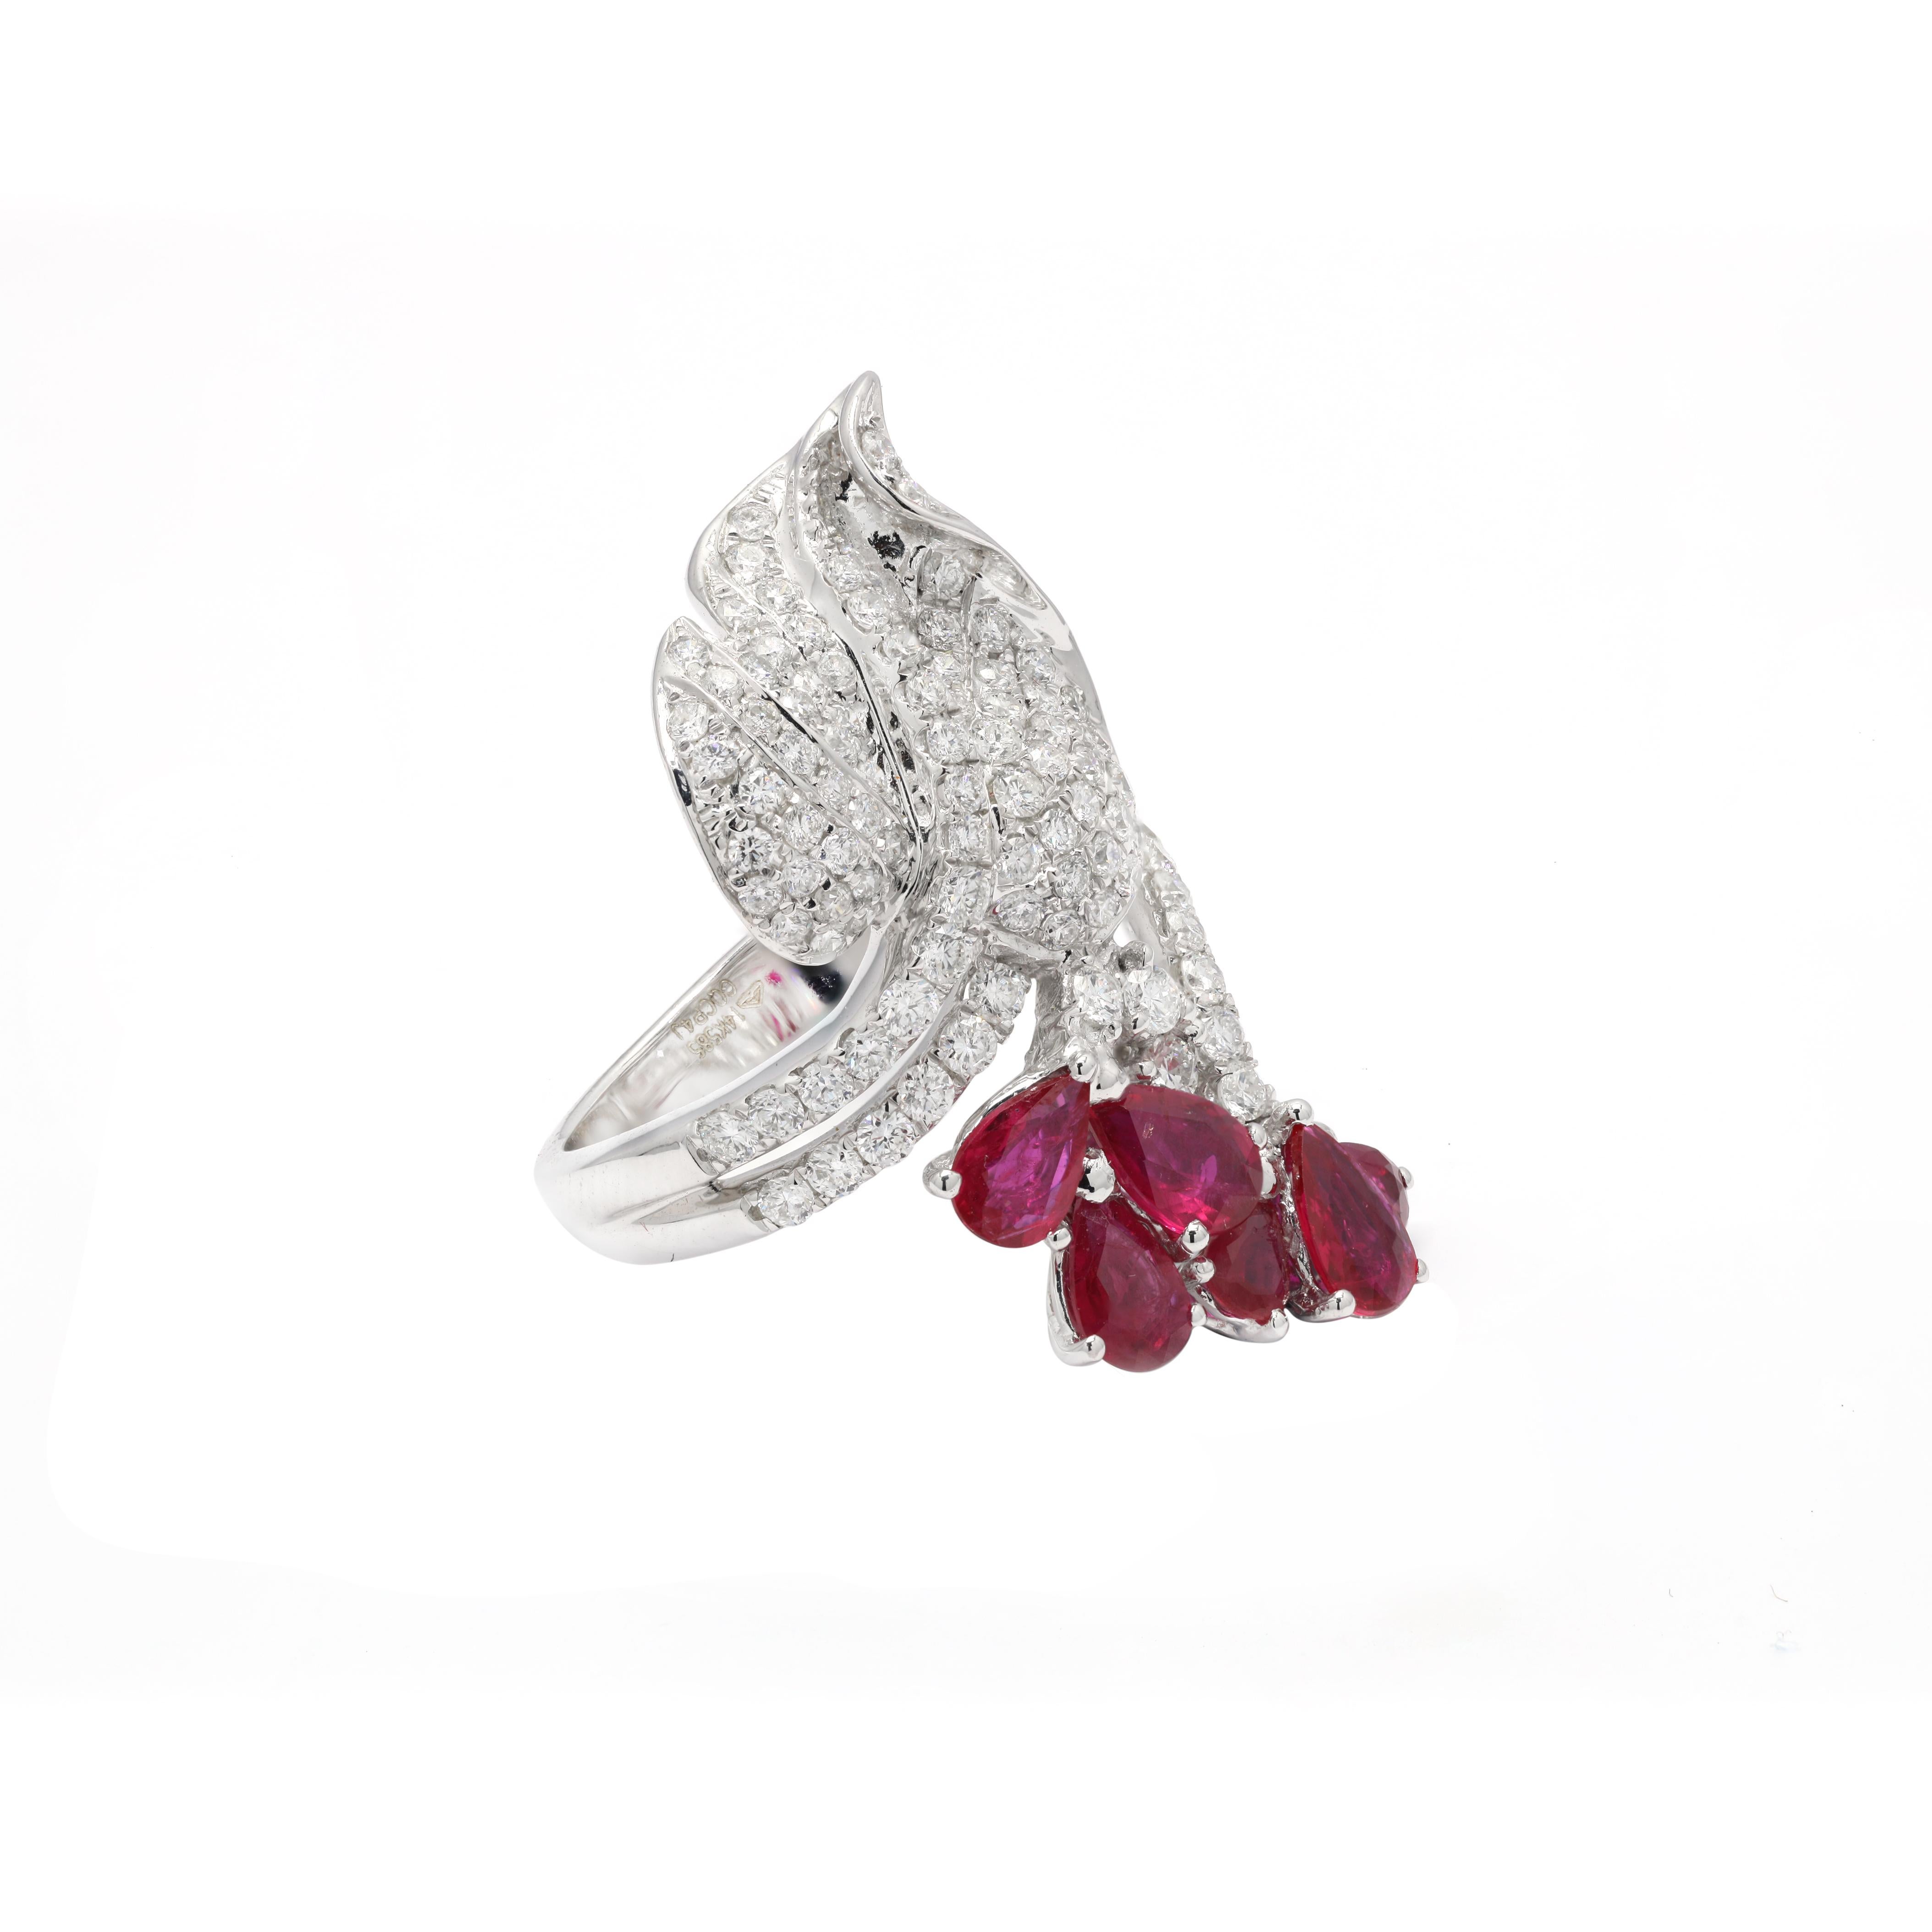 For Sale:  14K White Gold Pear Cut Ruby and Diamond Bridal Ring 4